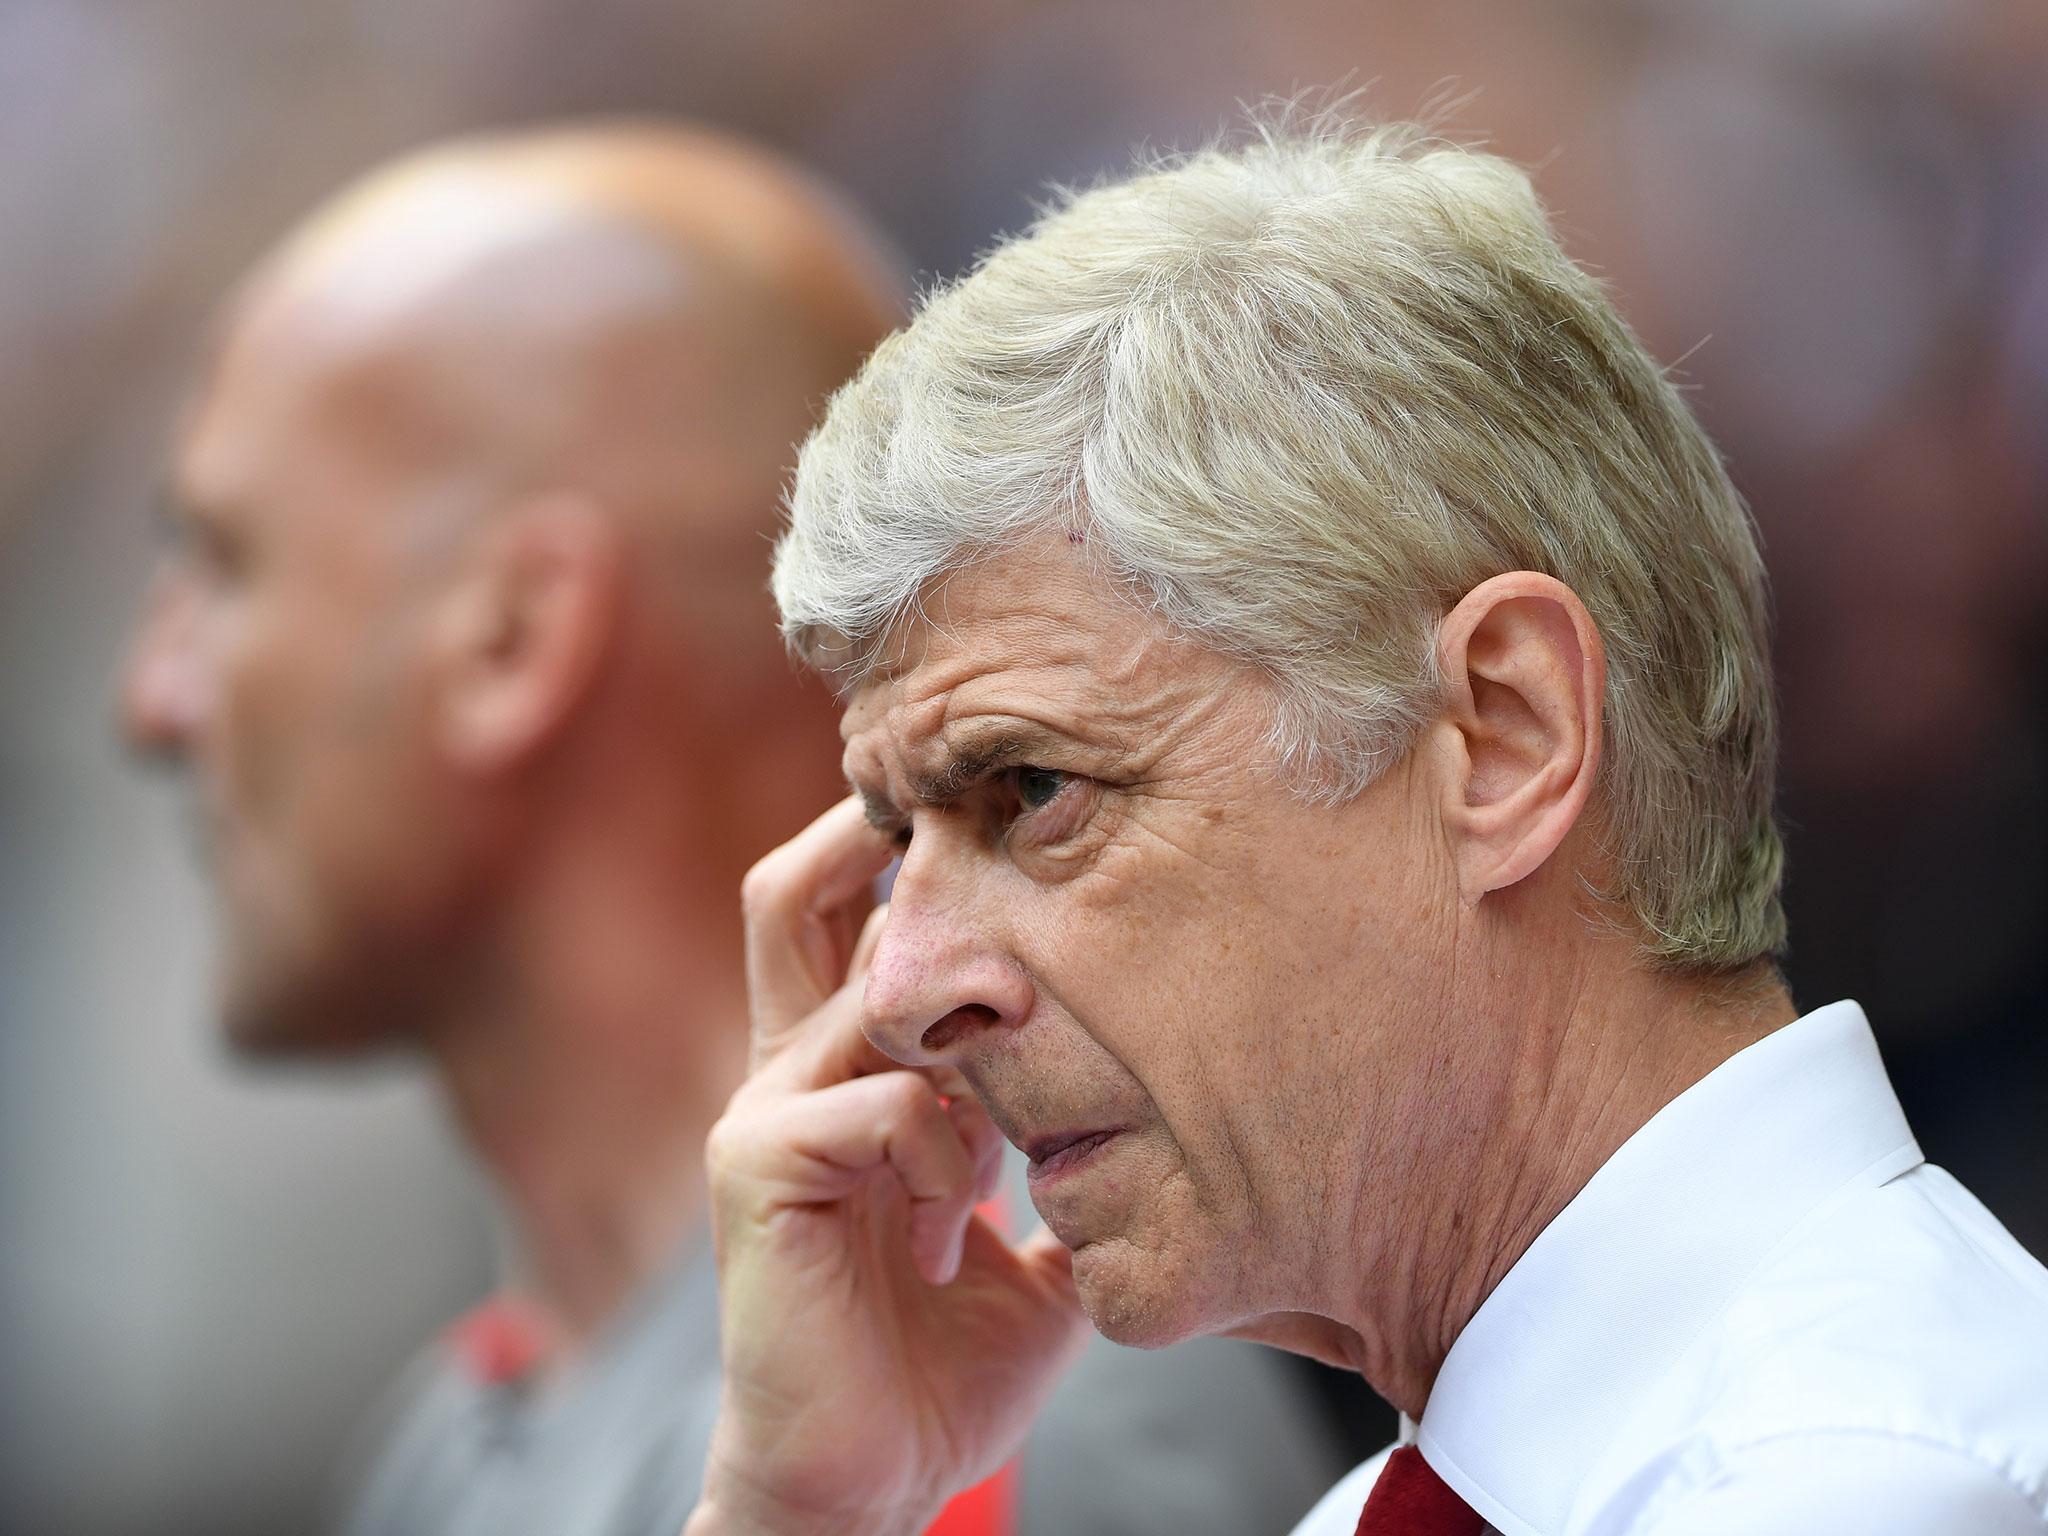 Arsene Wenger has been at the club for 21 years after joining in 1996